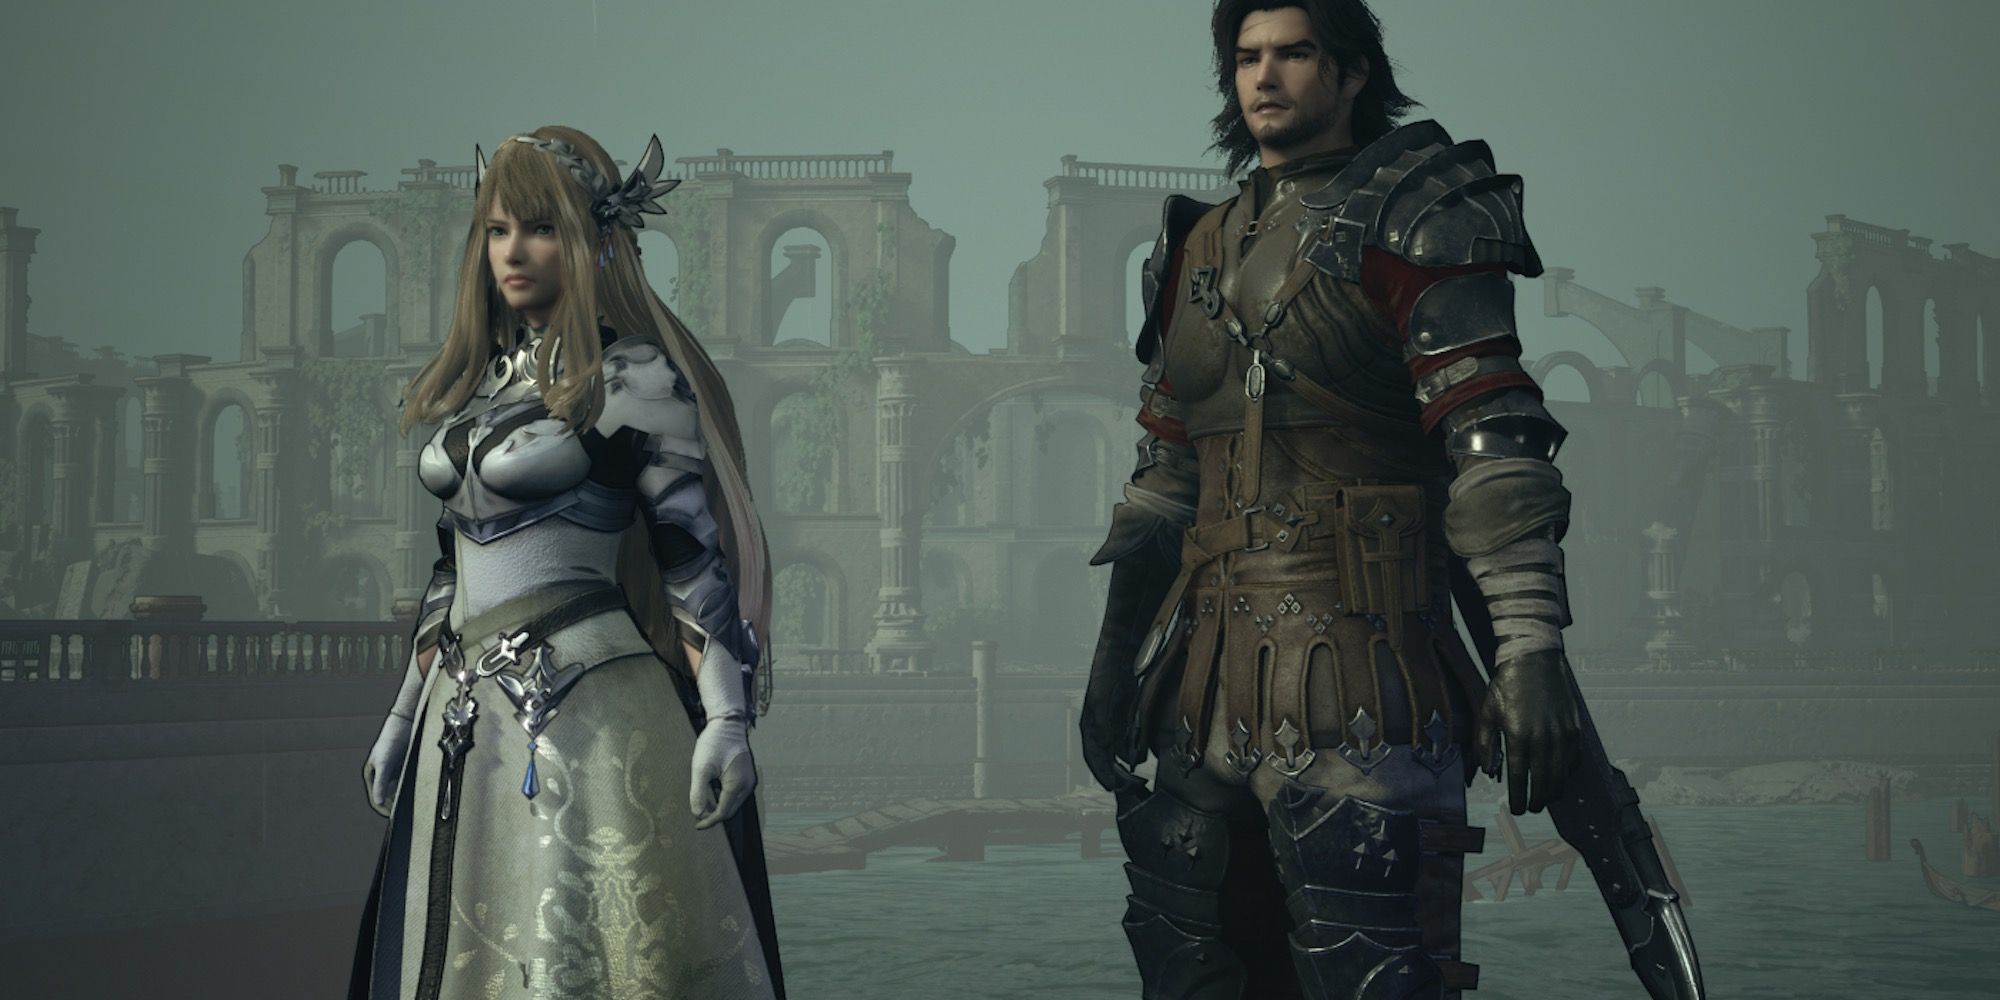 Valkyrie and Eygon in Valkyrie Elysium